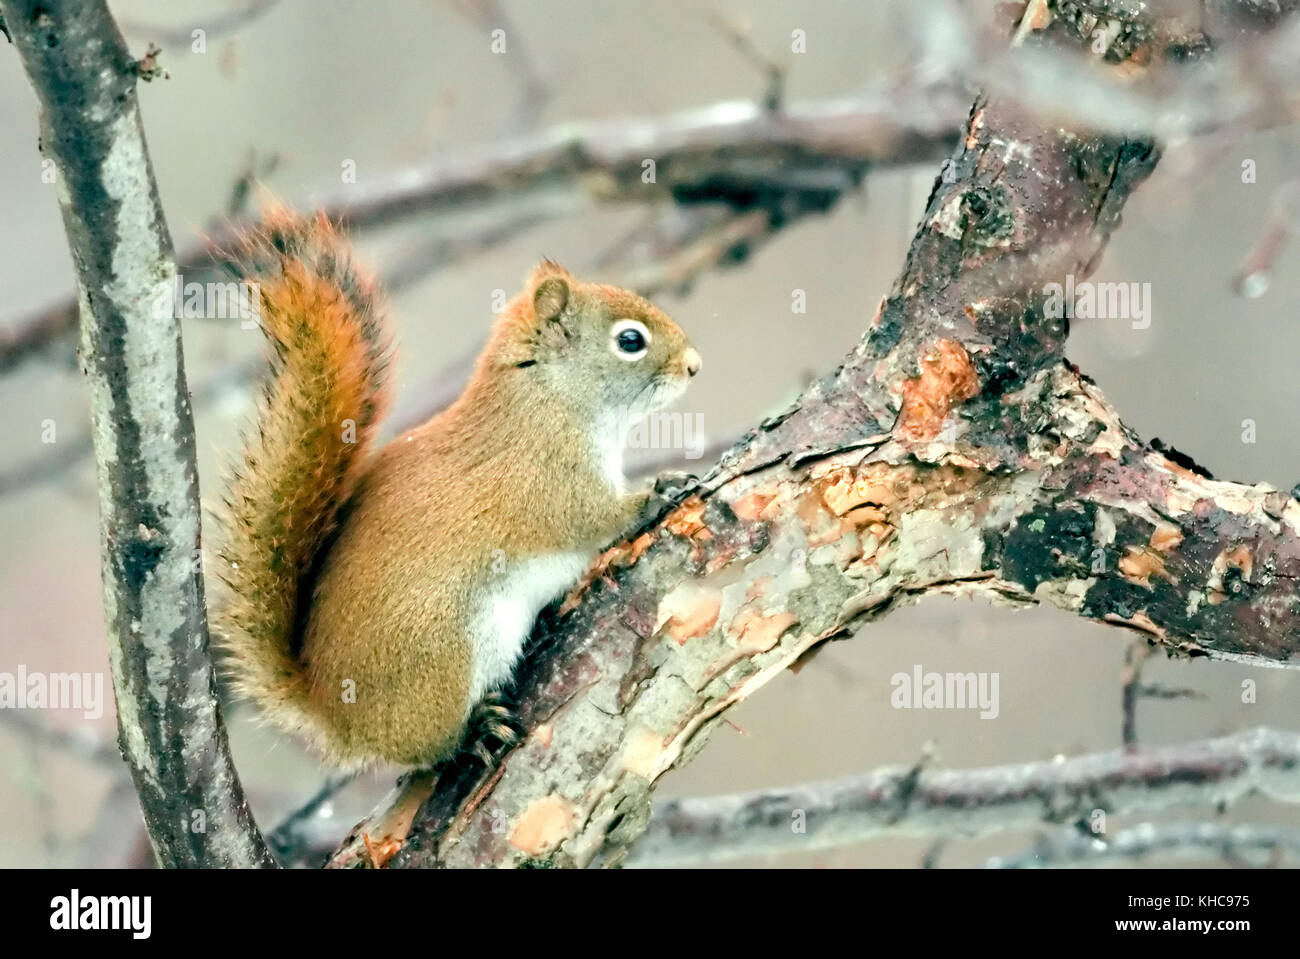 American Red Squirrel - Tamiasciurus hudsonicus perched on the branch of a tree. Stock Photo